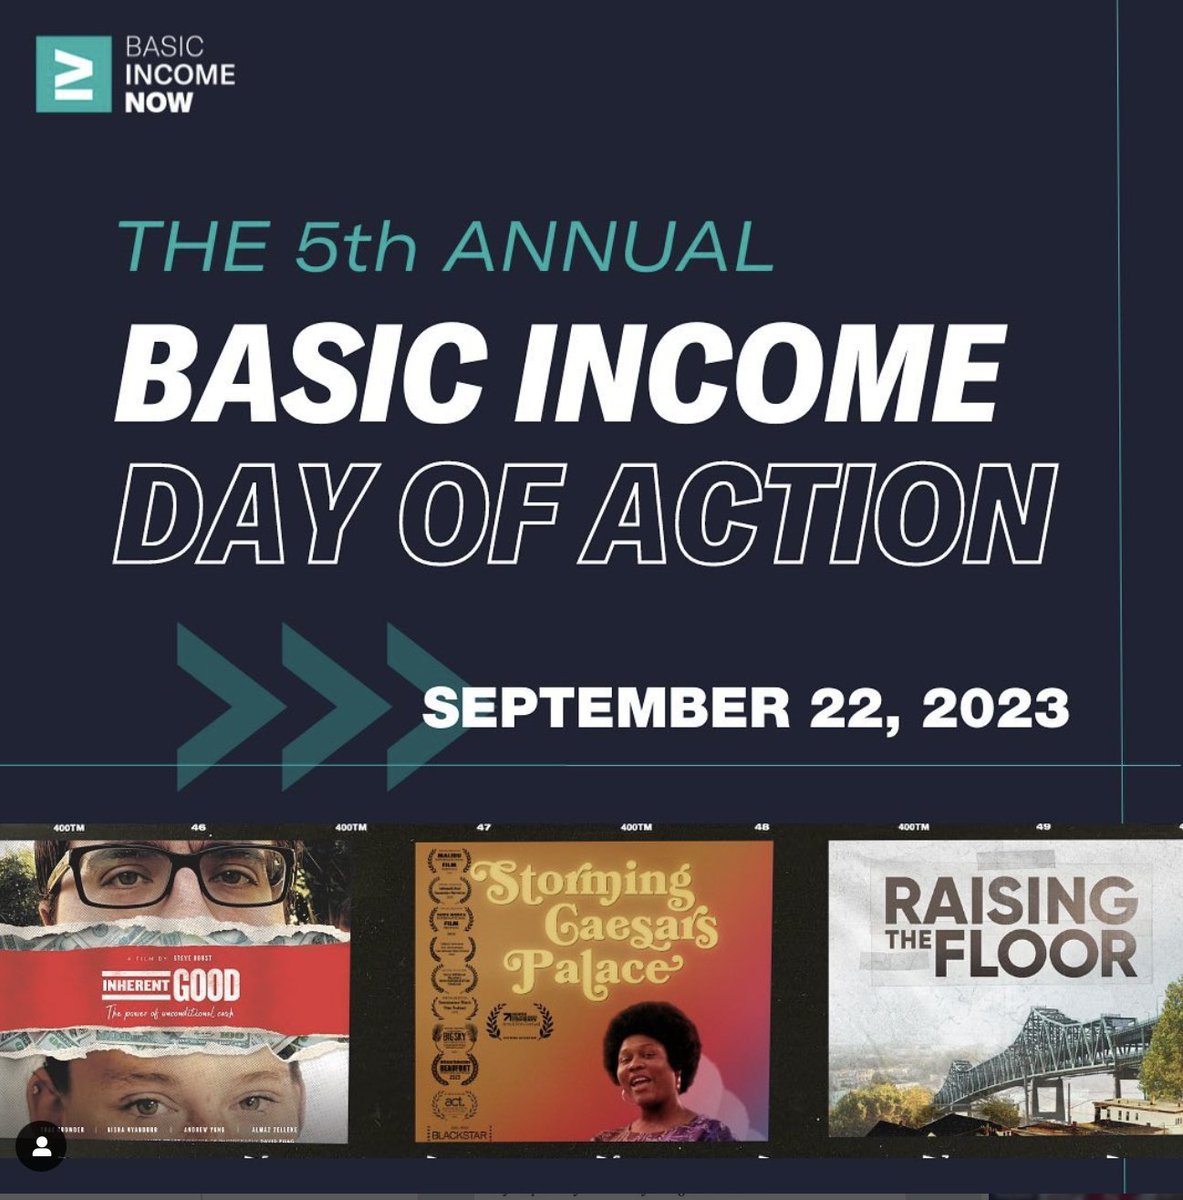 Save the date for the 5th annual #BasicIncome Day of Action! We are partnering with the 2023 @basicincomeweek to make narrative change happen through the power of #film. Learn more, host a screening of RAISING THE FLOOR or attend one near you: basicincomemarch.com/about 🎥🙌